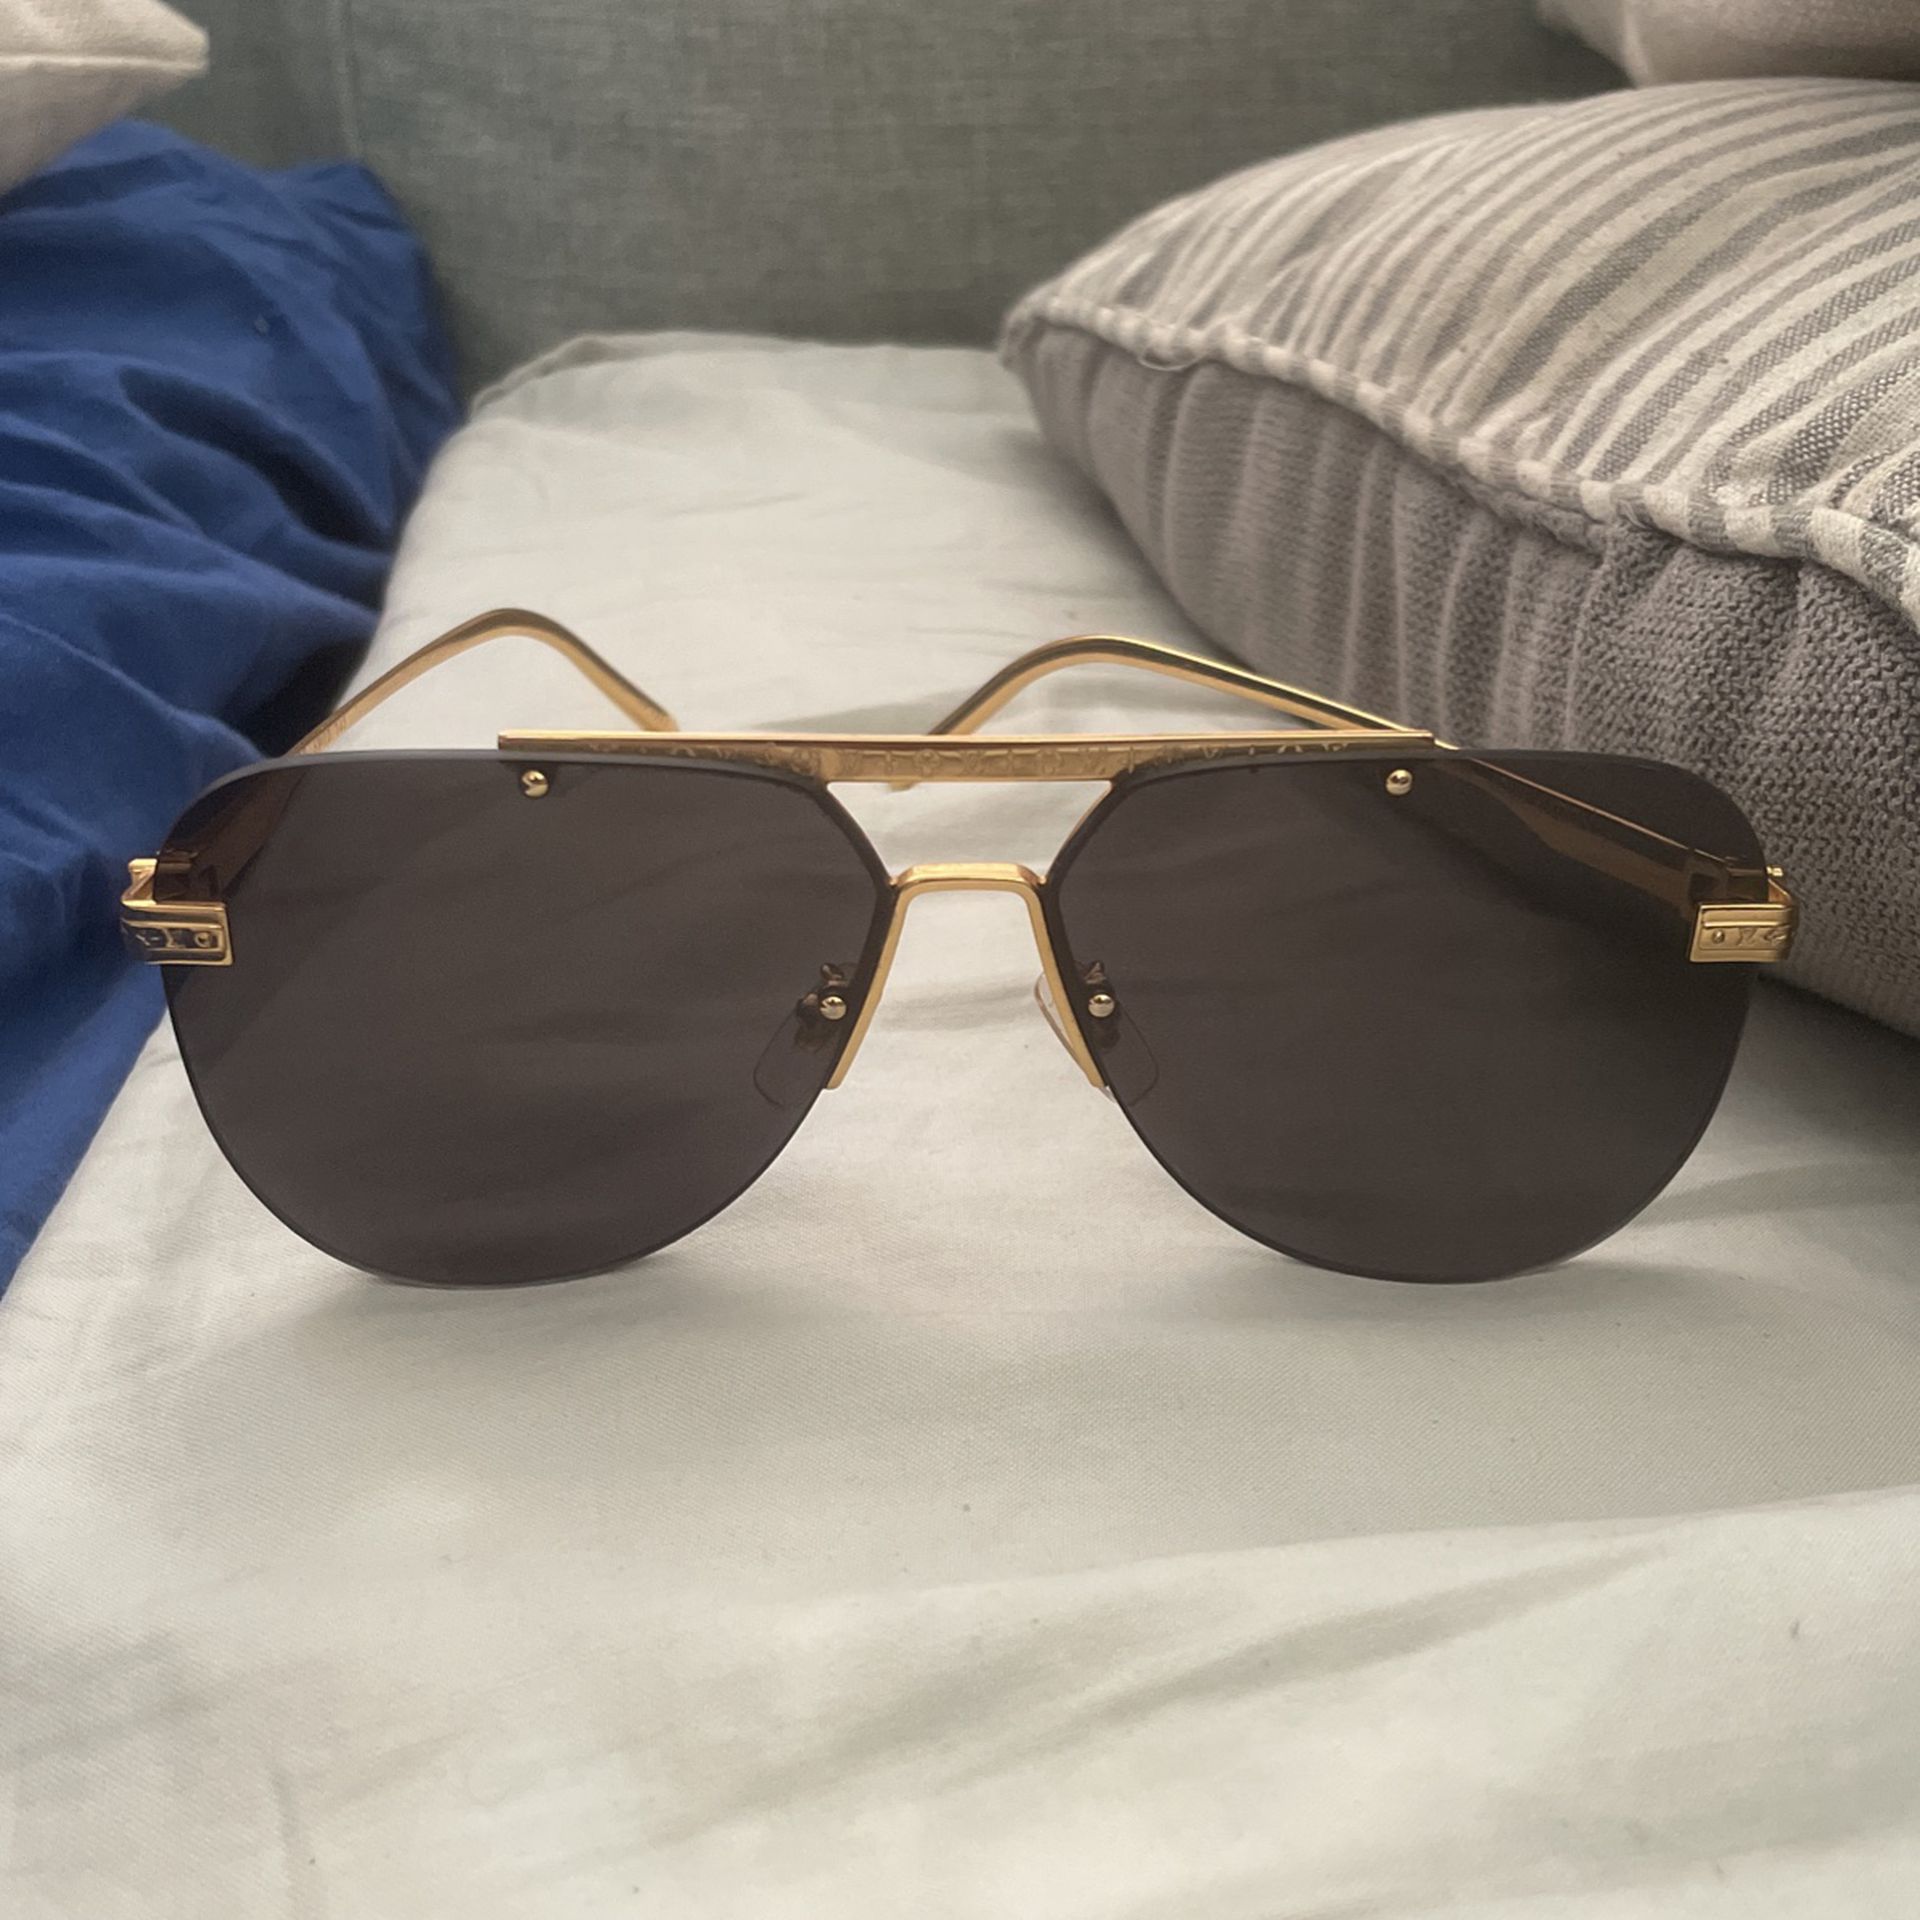 Louis Vuitton Glasses for Sale in Upland, CA - OfferUp